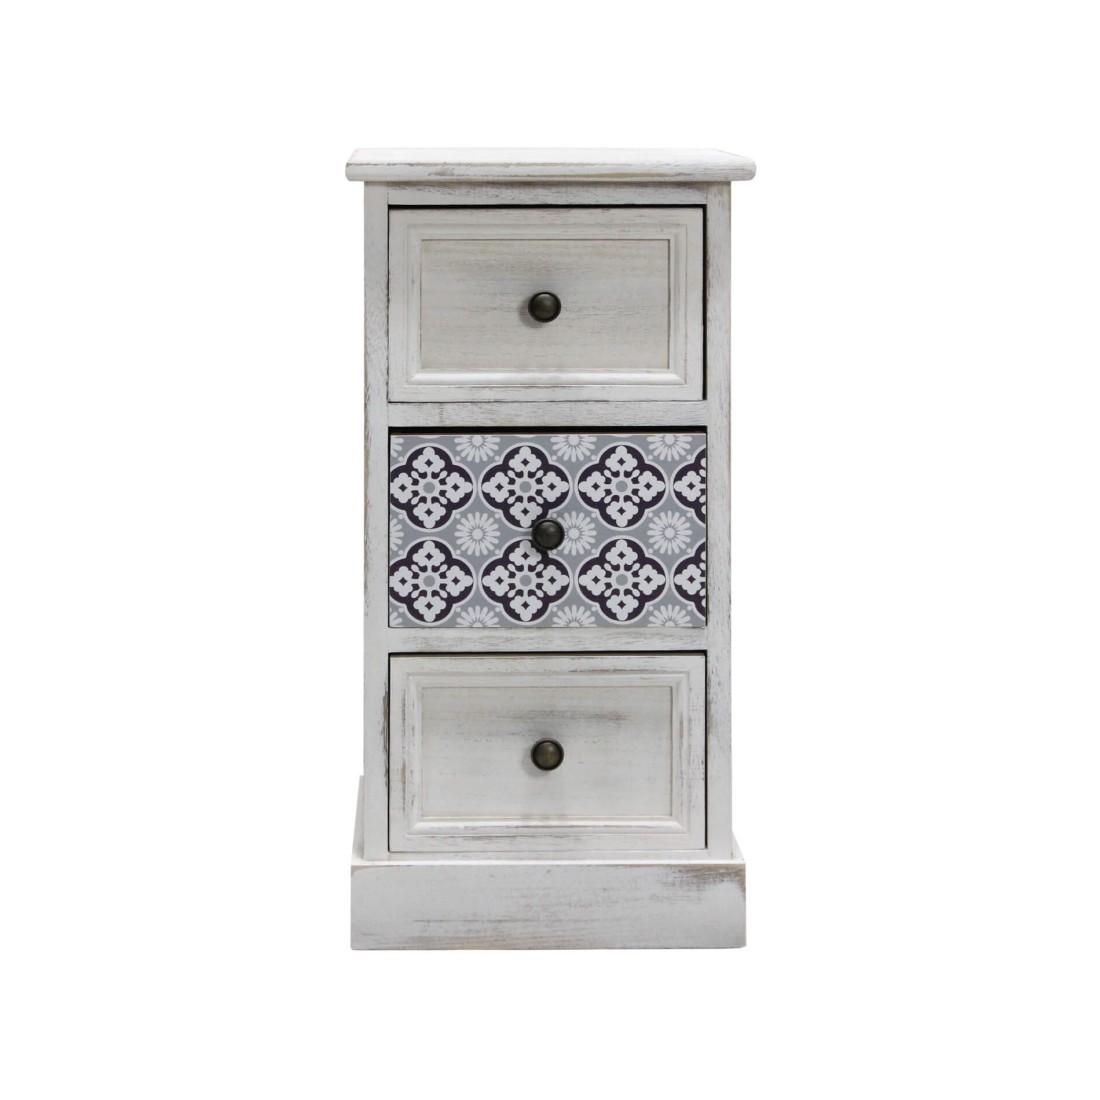 Classic style white bedroom bedside table